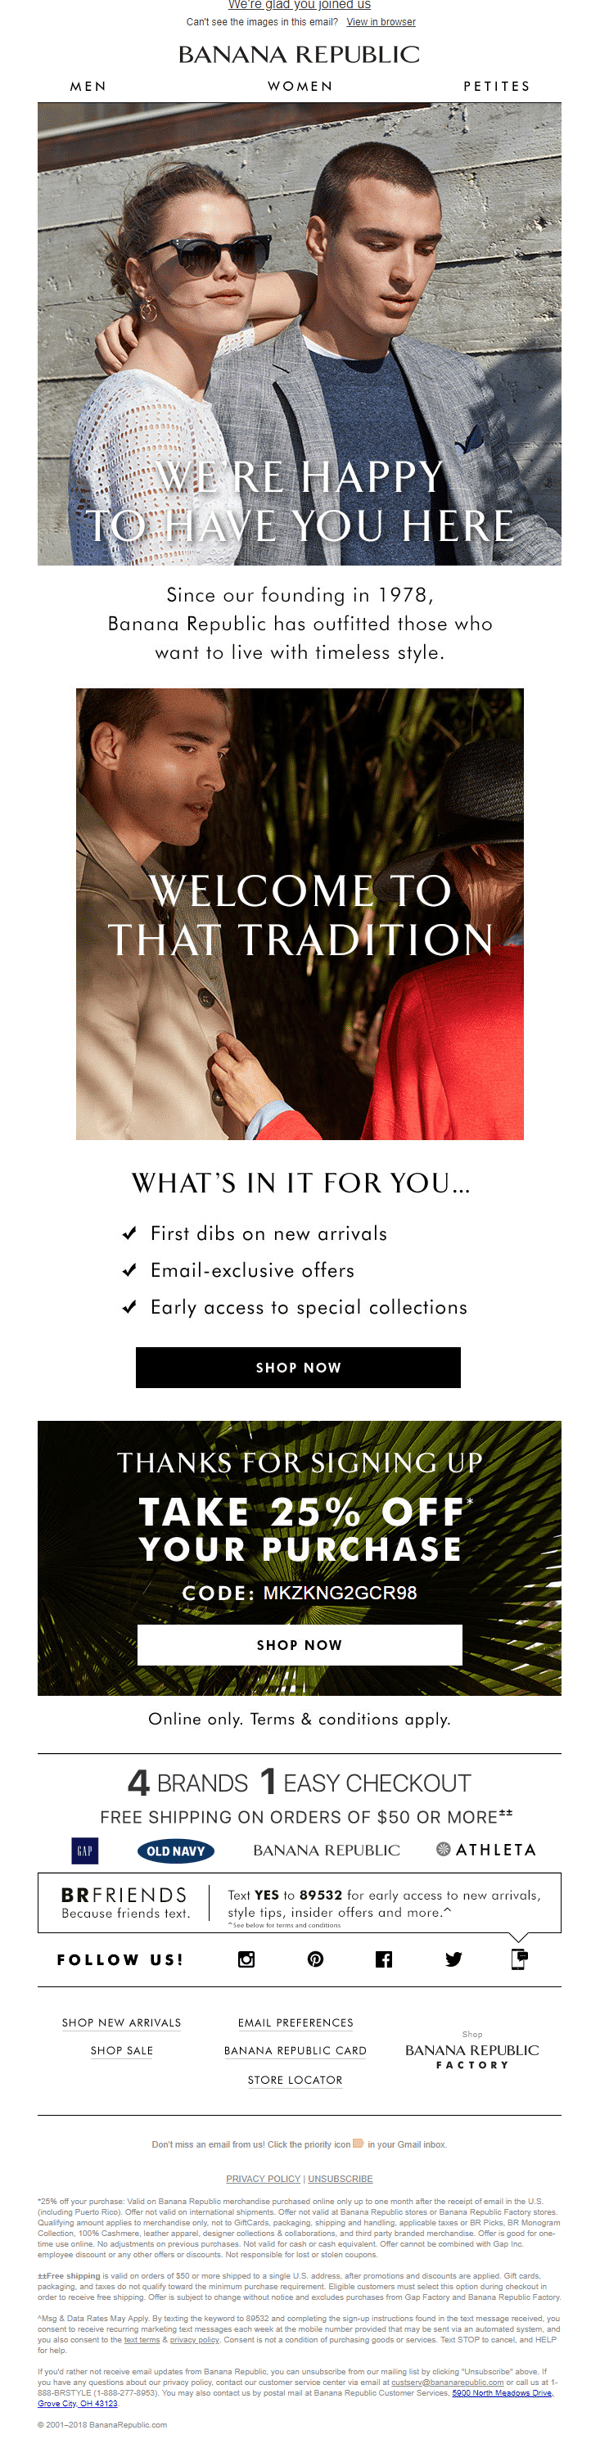 Banana Republic Welcome Email